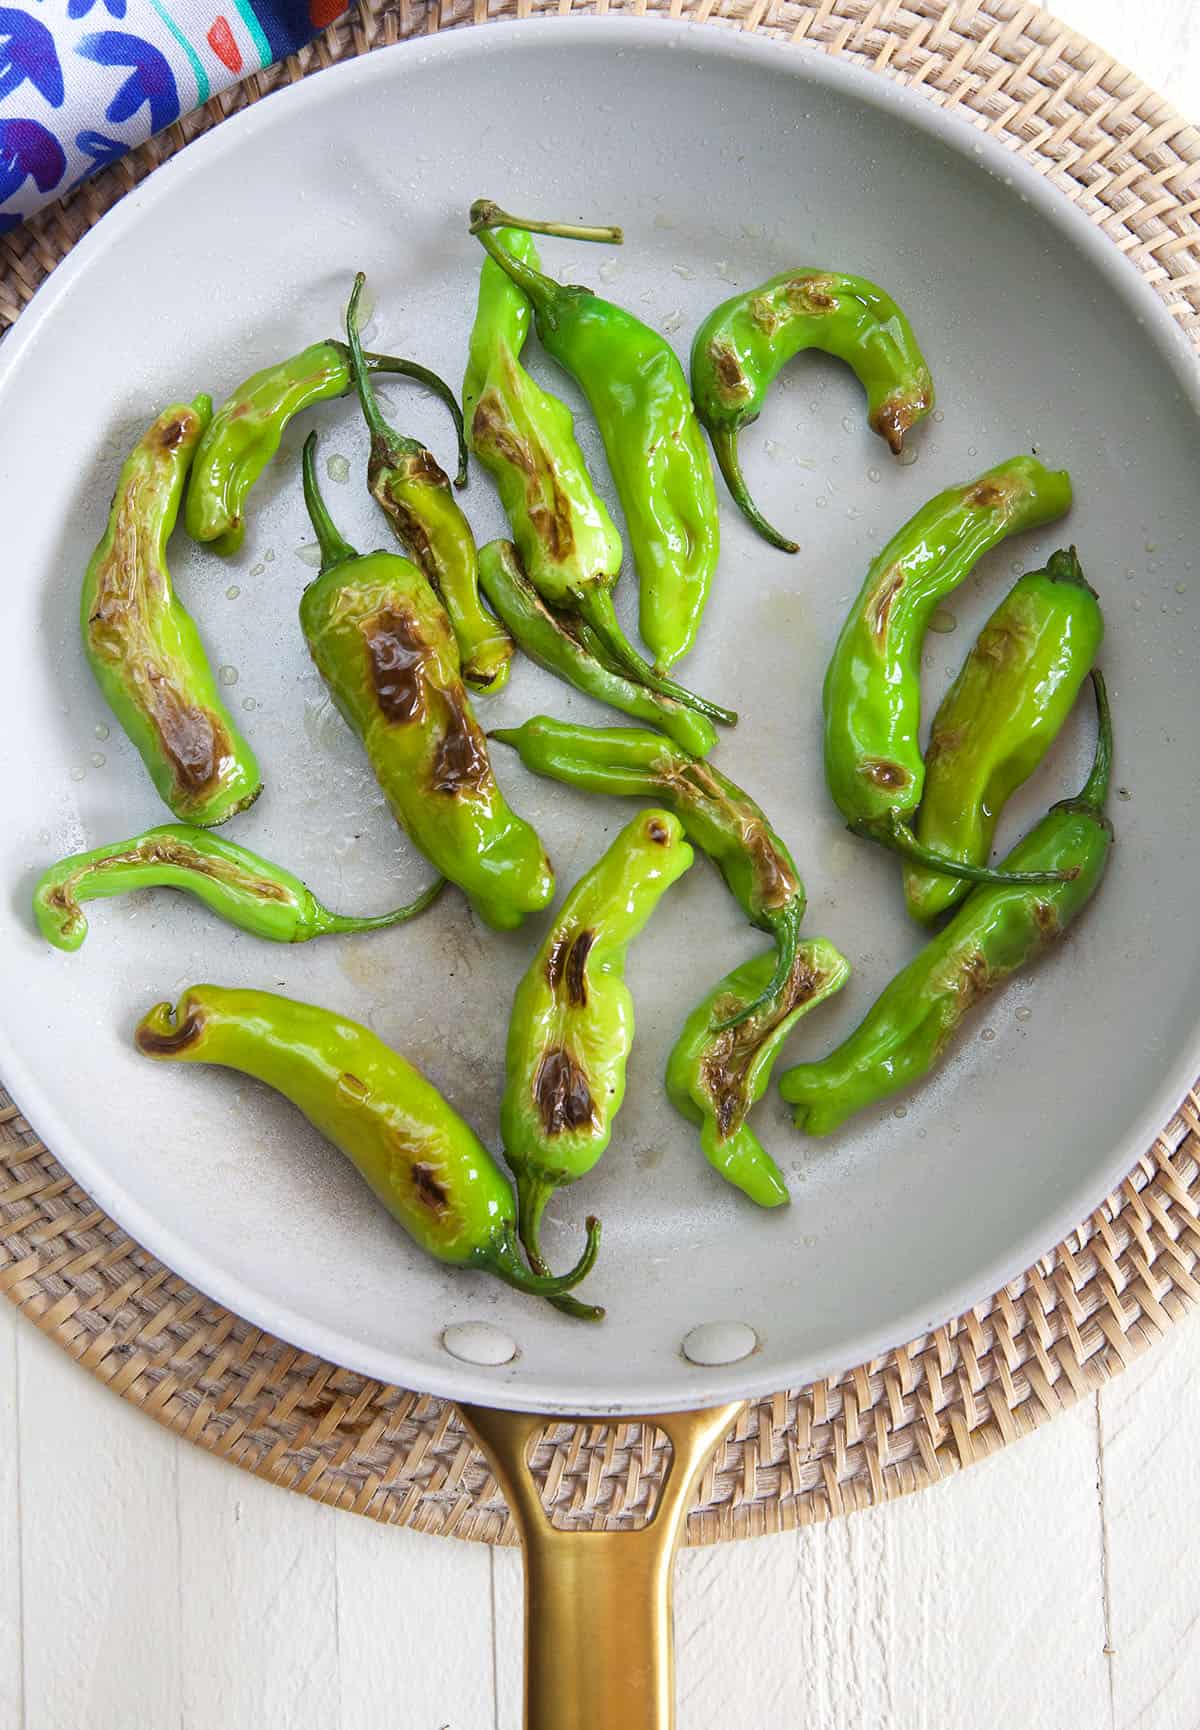 Several blistered shishito peppers are in a skillet.